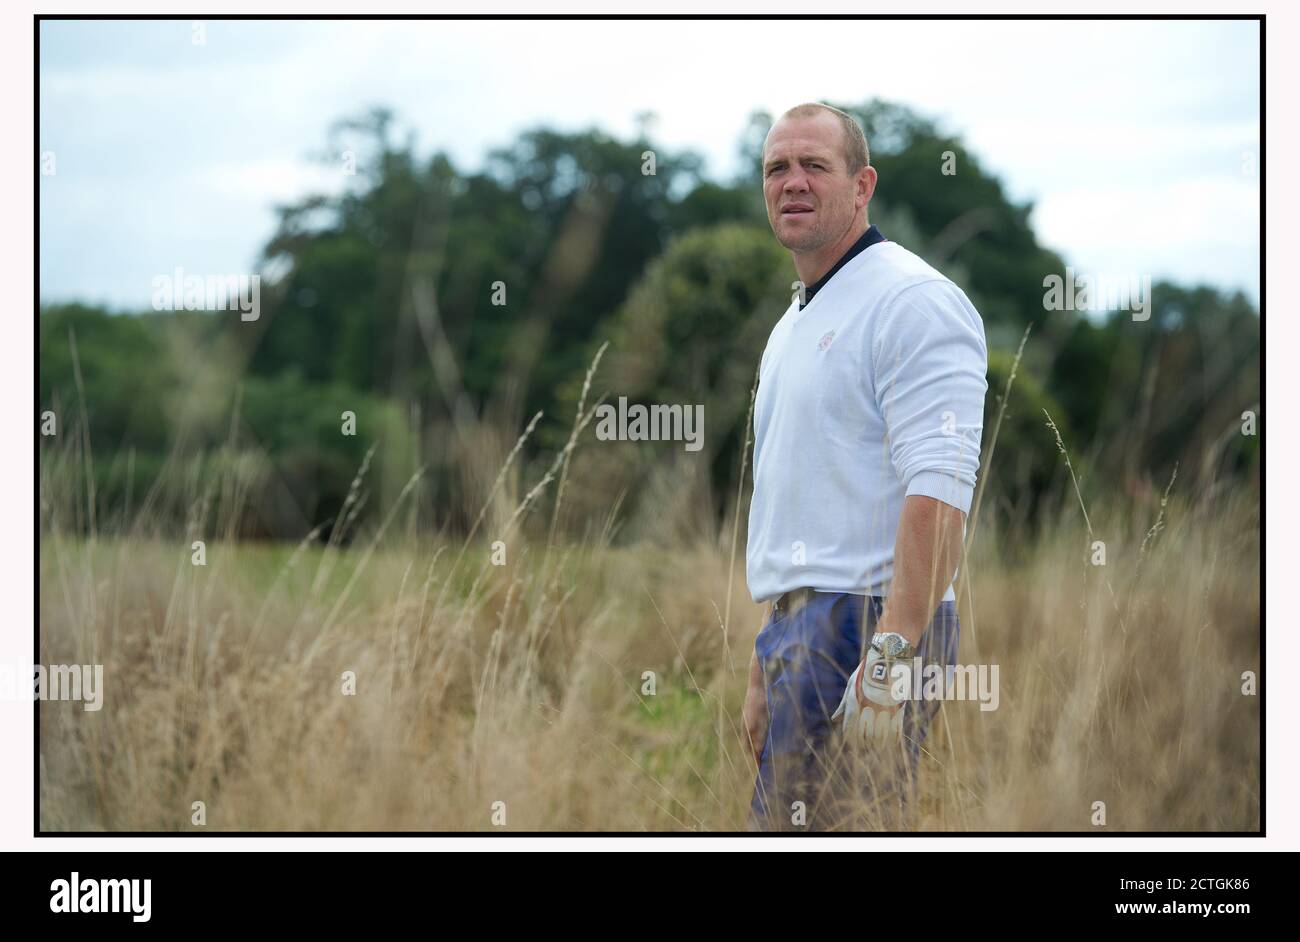 GLOUCESTER PLAYER-COACH E EX ENGLAND RUGBY PLAYER MIKE TINDALL GIOCANDO A GOLF AL BUCKINGHAMSHIRE. IMMAGINE DI CREDITO : © MARK PAIN / ALAMY Foto Stock